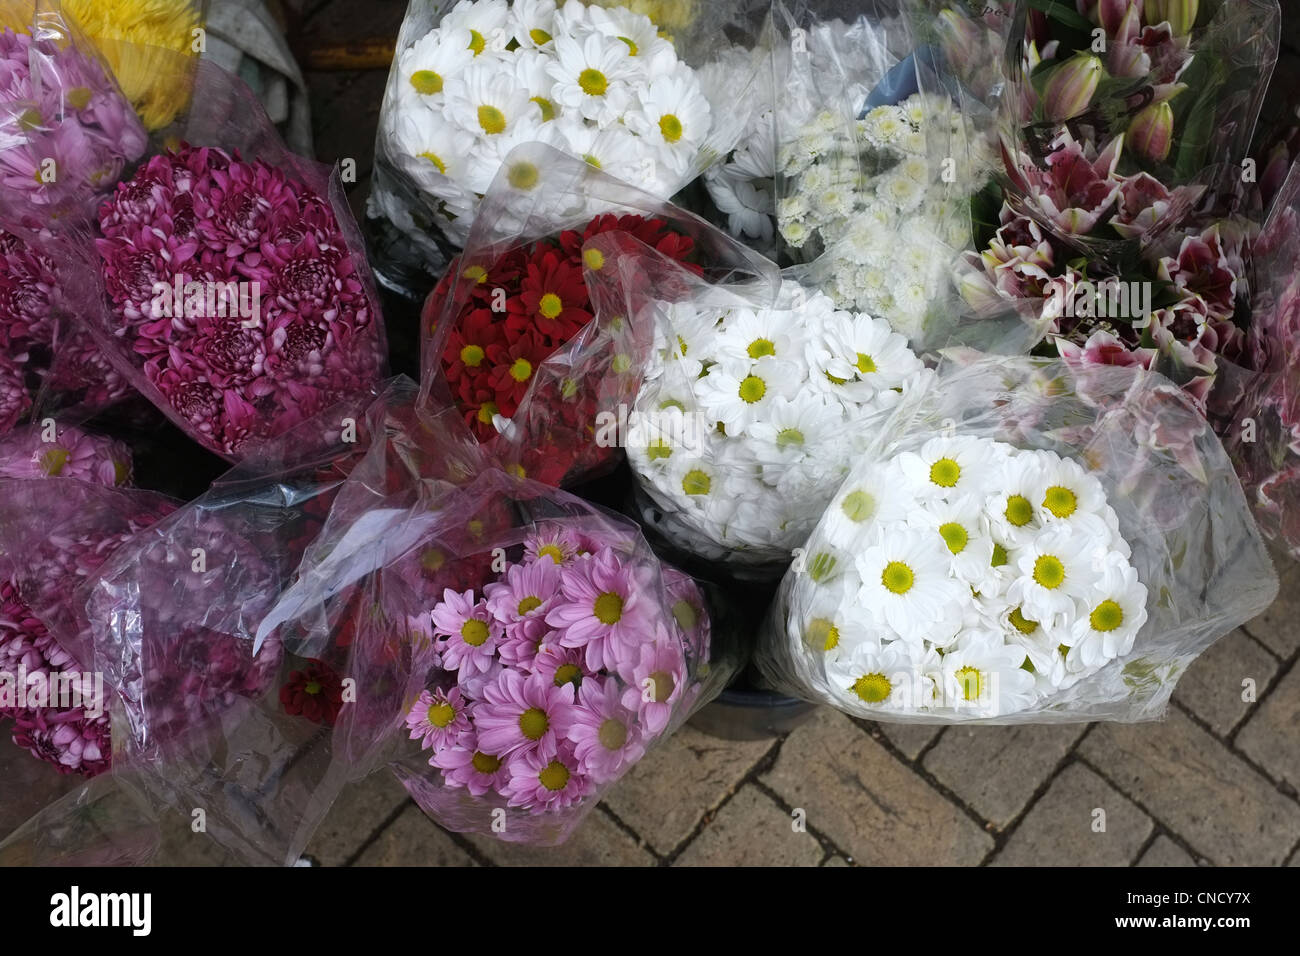 Cut Flowers for sale on a market stall in a High Street Stock Photo